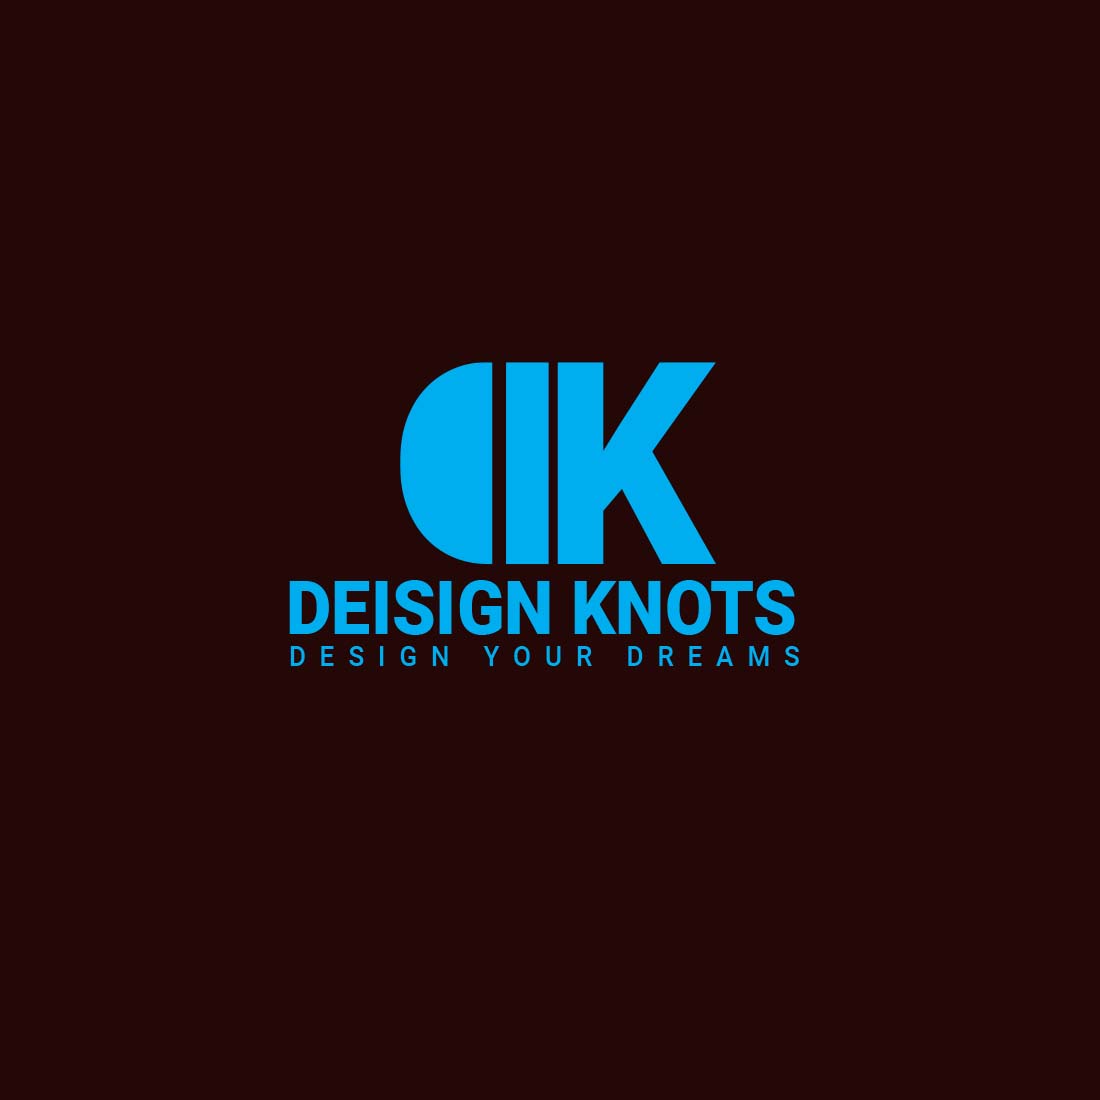 Four different style letter mark logo of letters Dk for sale preview image.